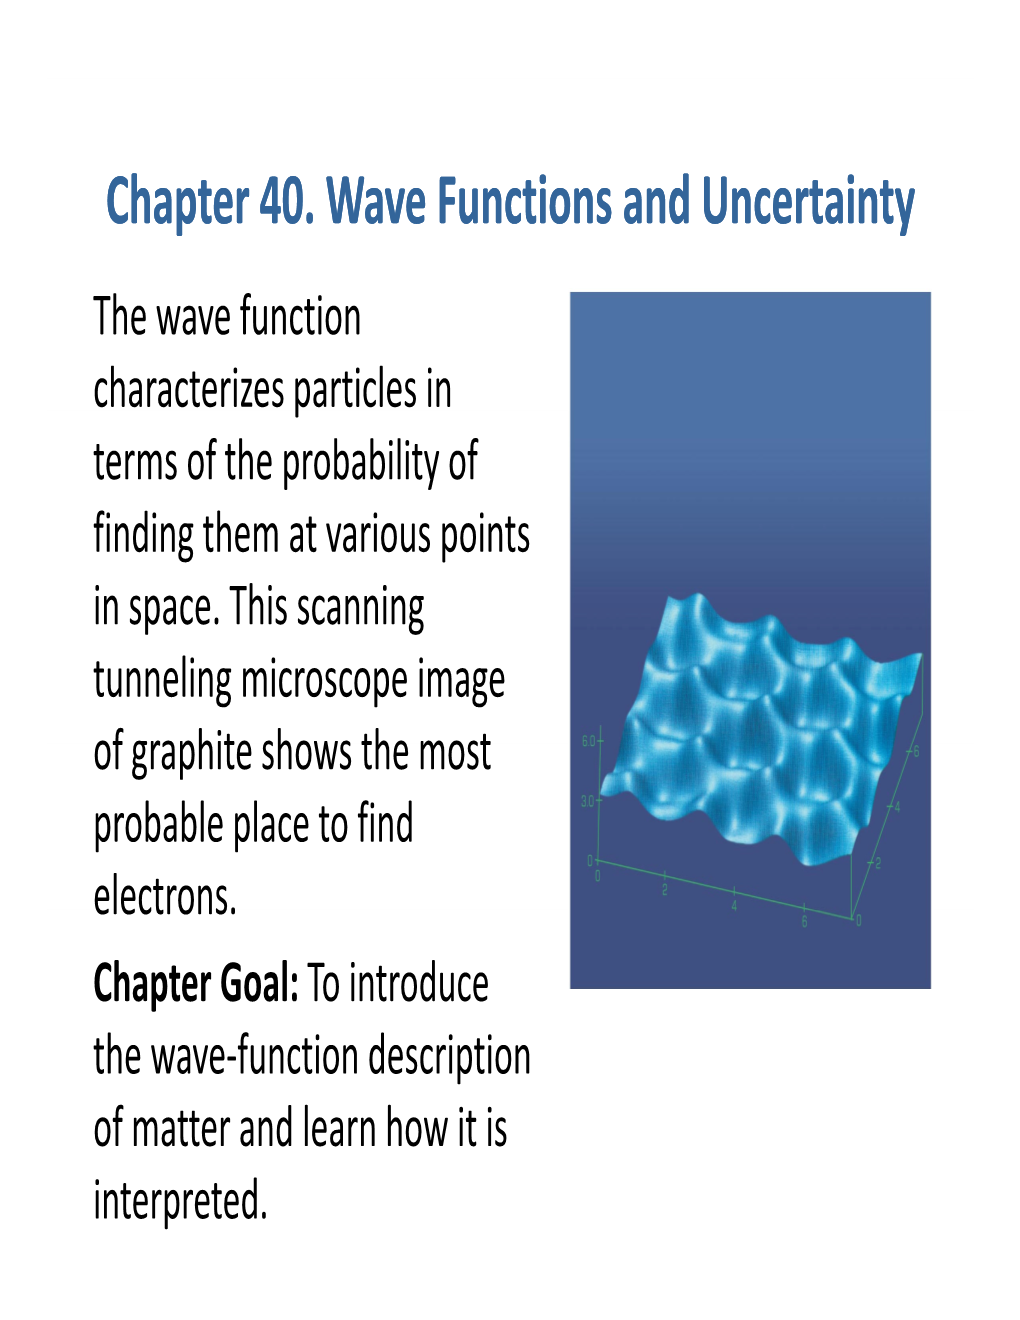 Chapter 40. Wave Functions and Uncertainty the Wave Function Characterizes Particles in Terms of the Probability of Finding Them at Various Points in Space